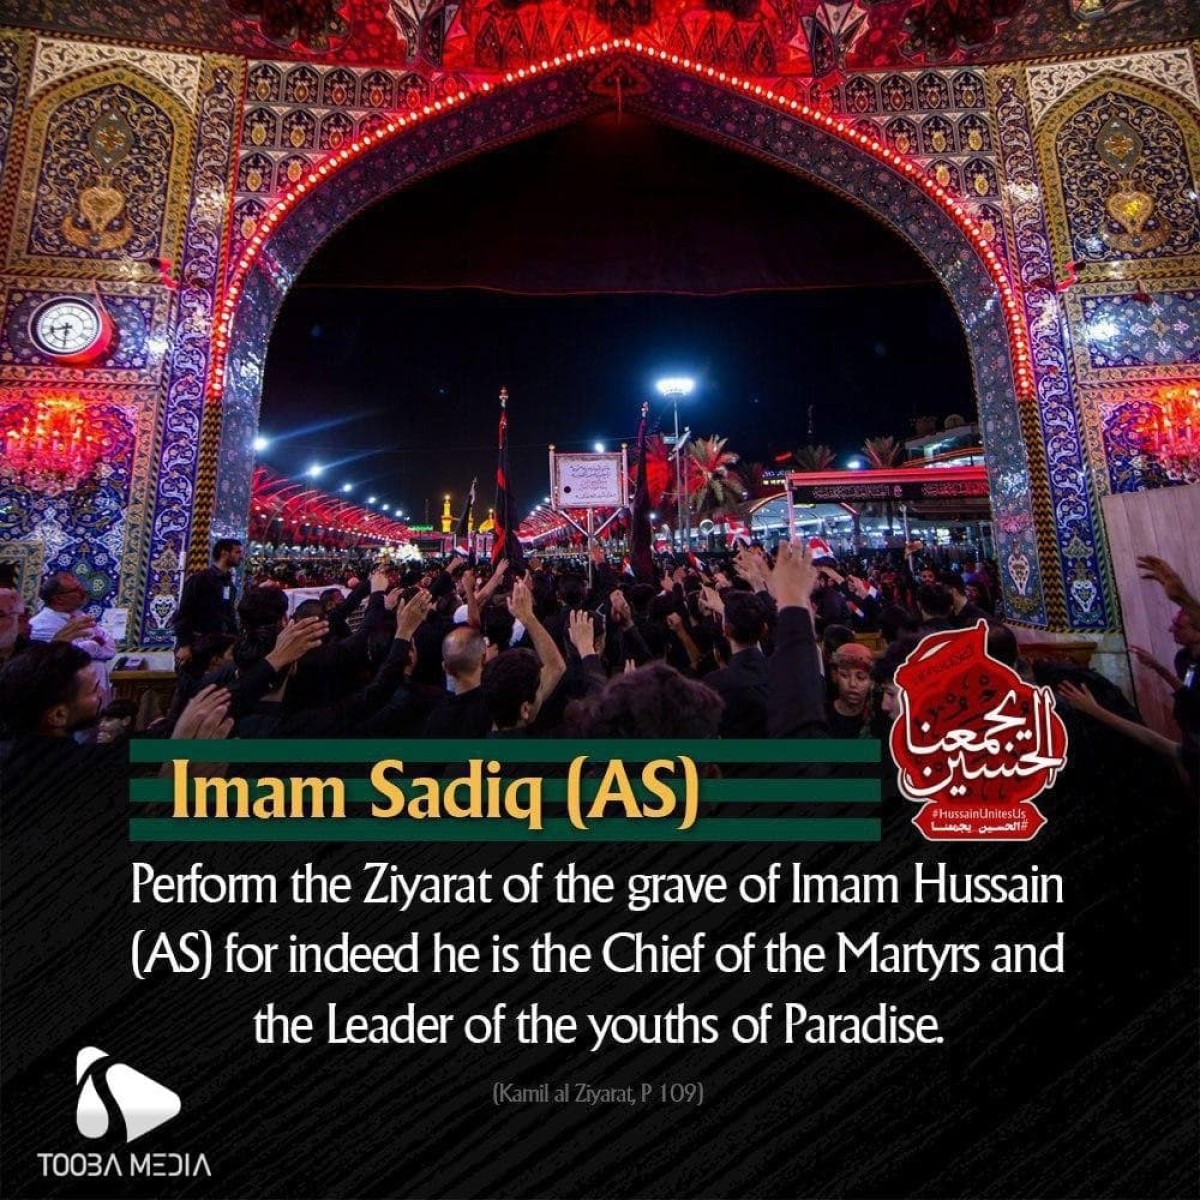 Perform the Ziyarat of the grave of Imam Hussain (AS)